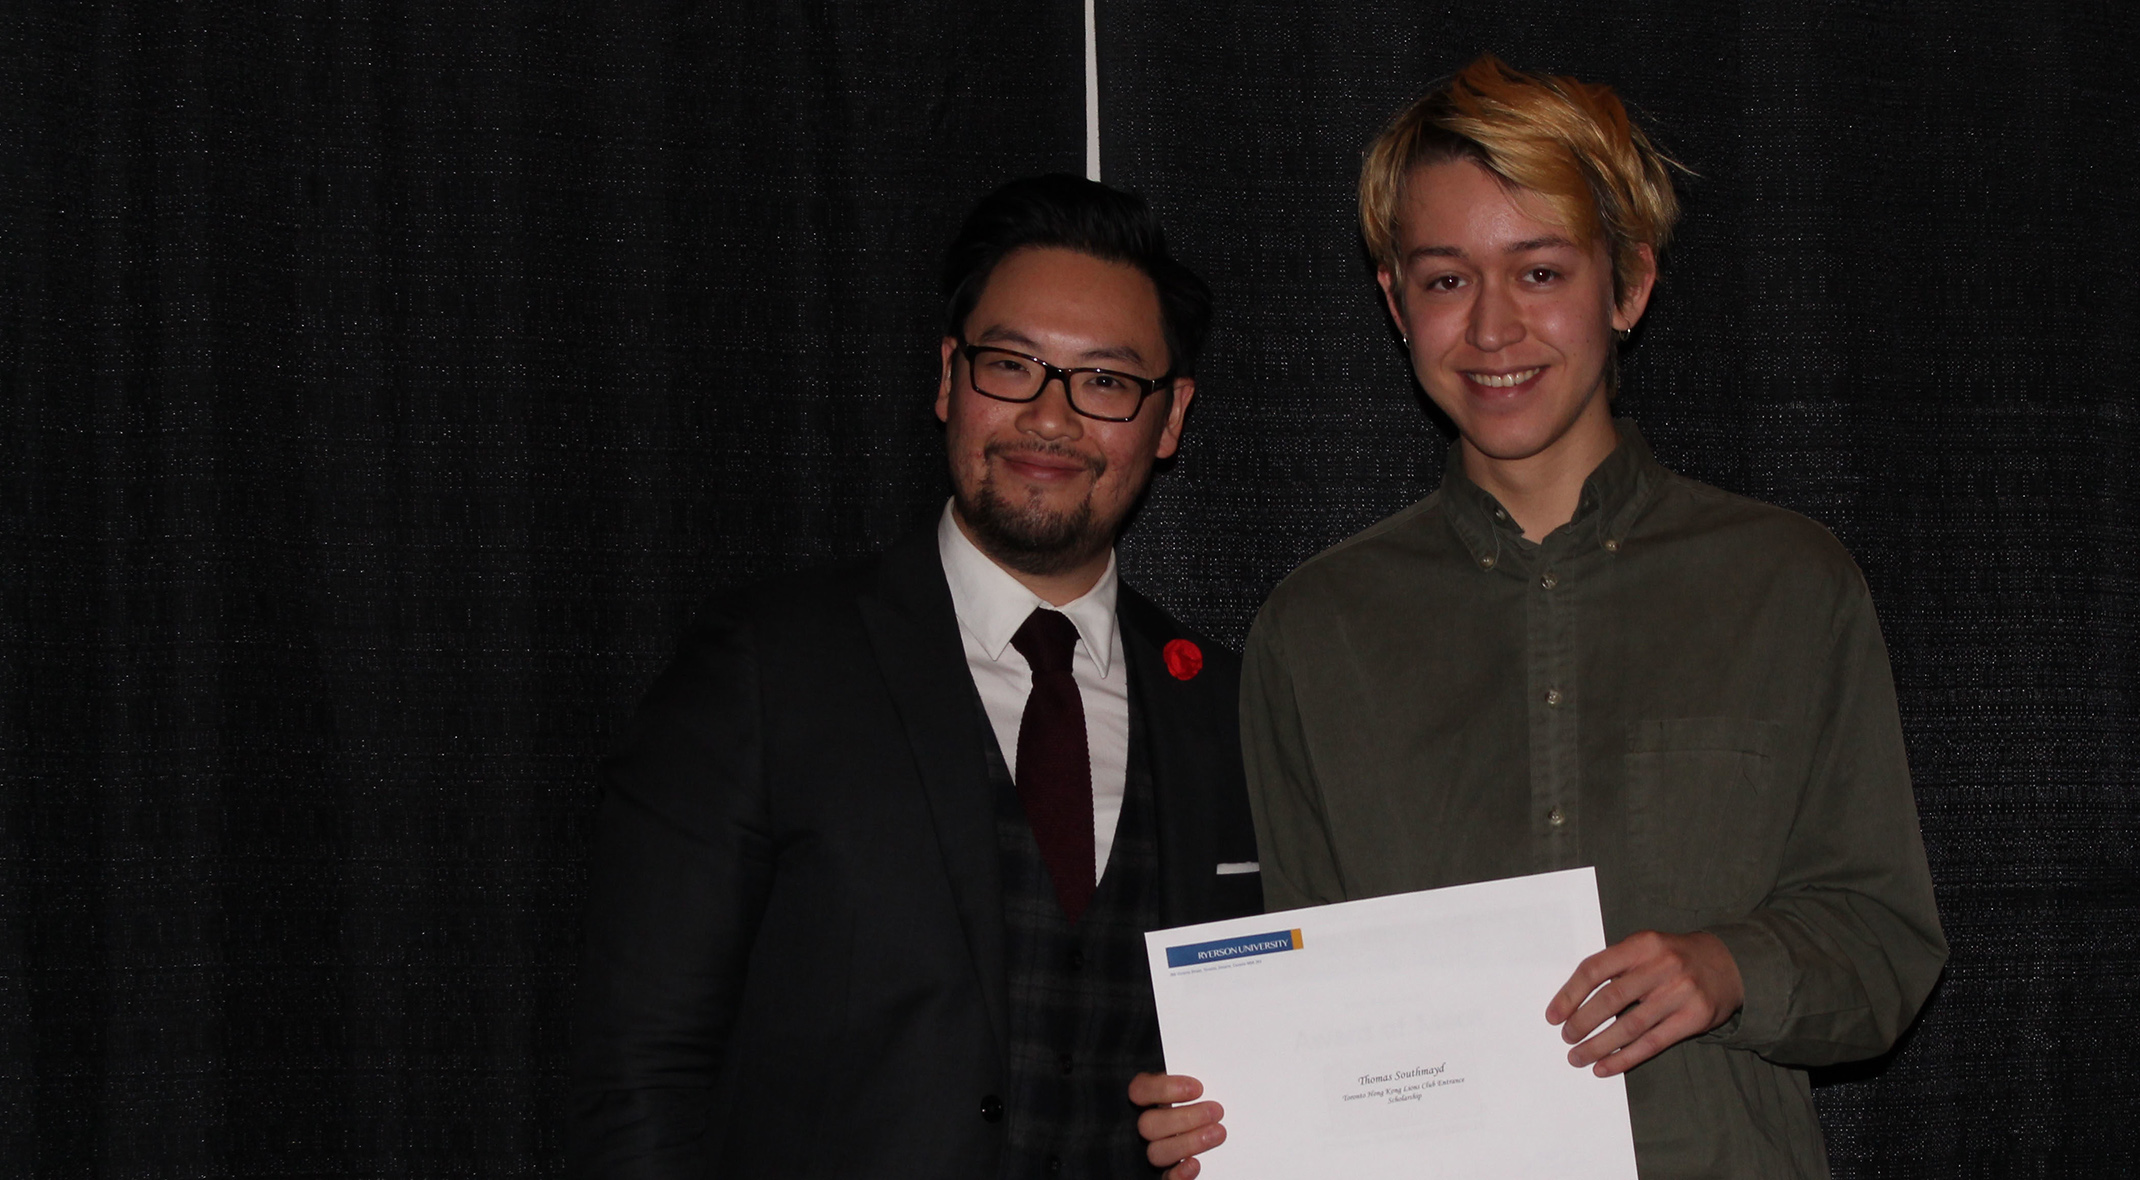 2015 winner Thomas Southmayd with Awards committee member Adrian Ma.